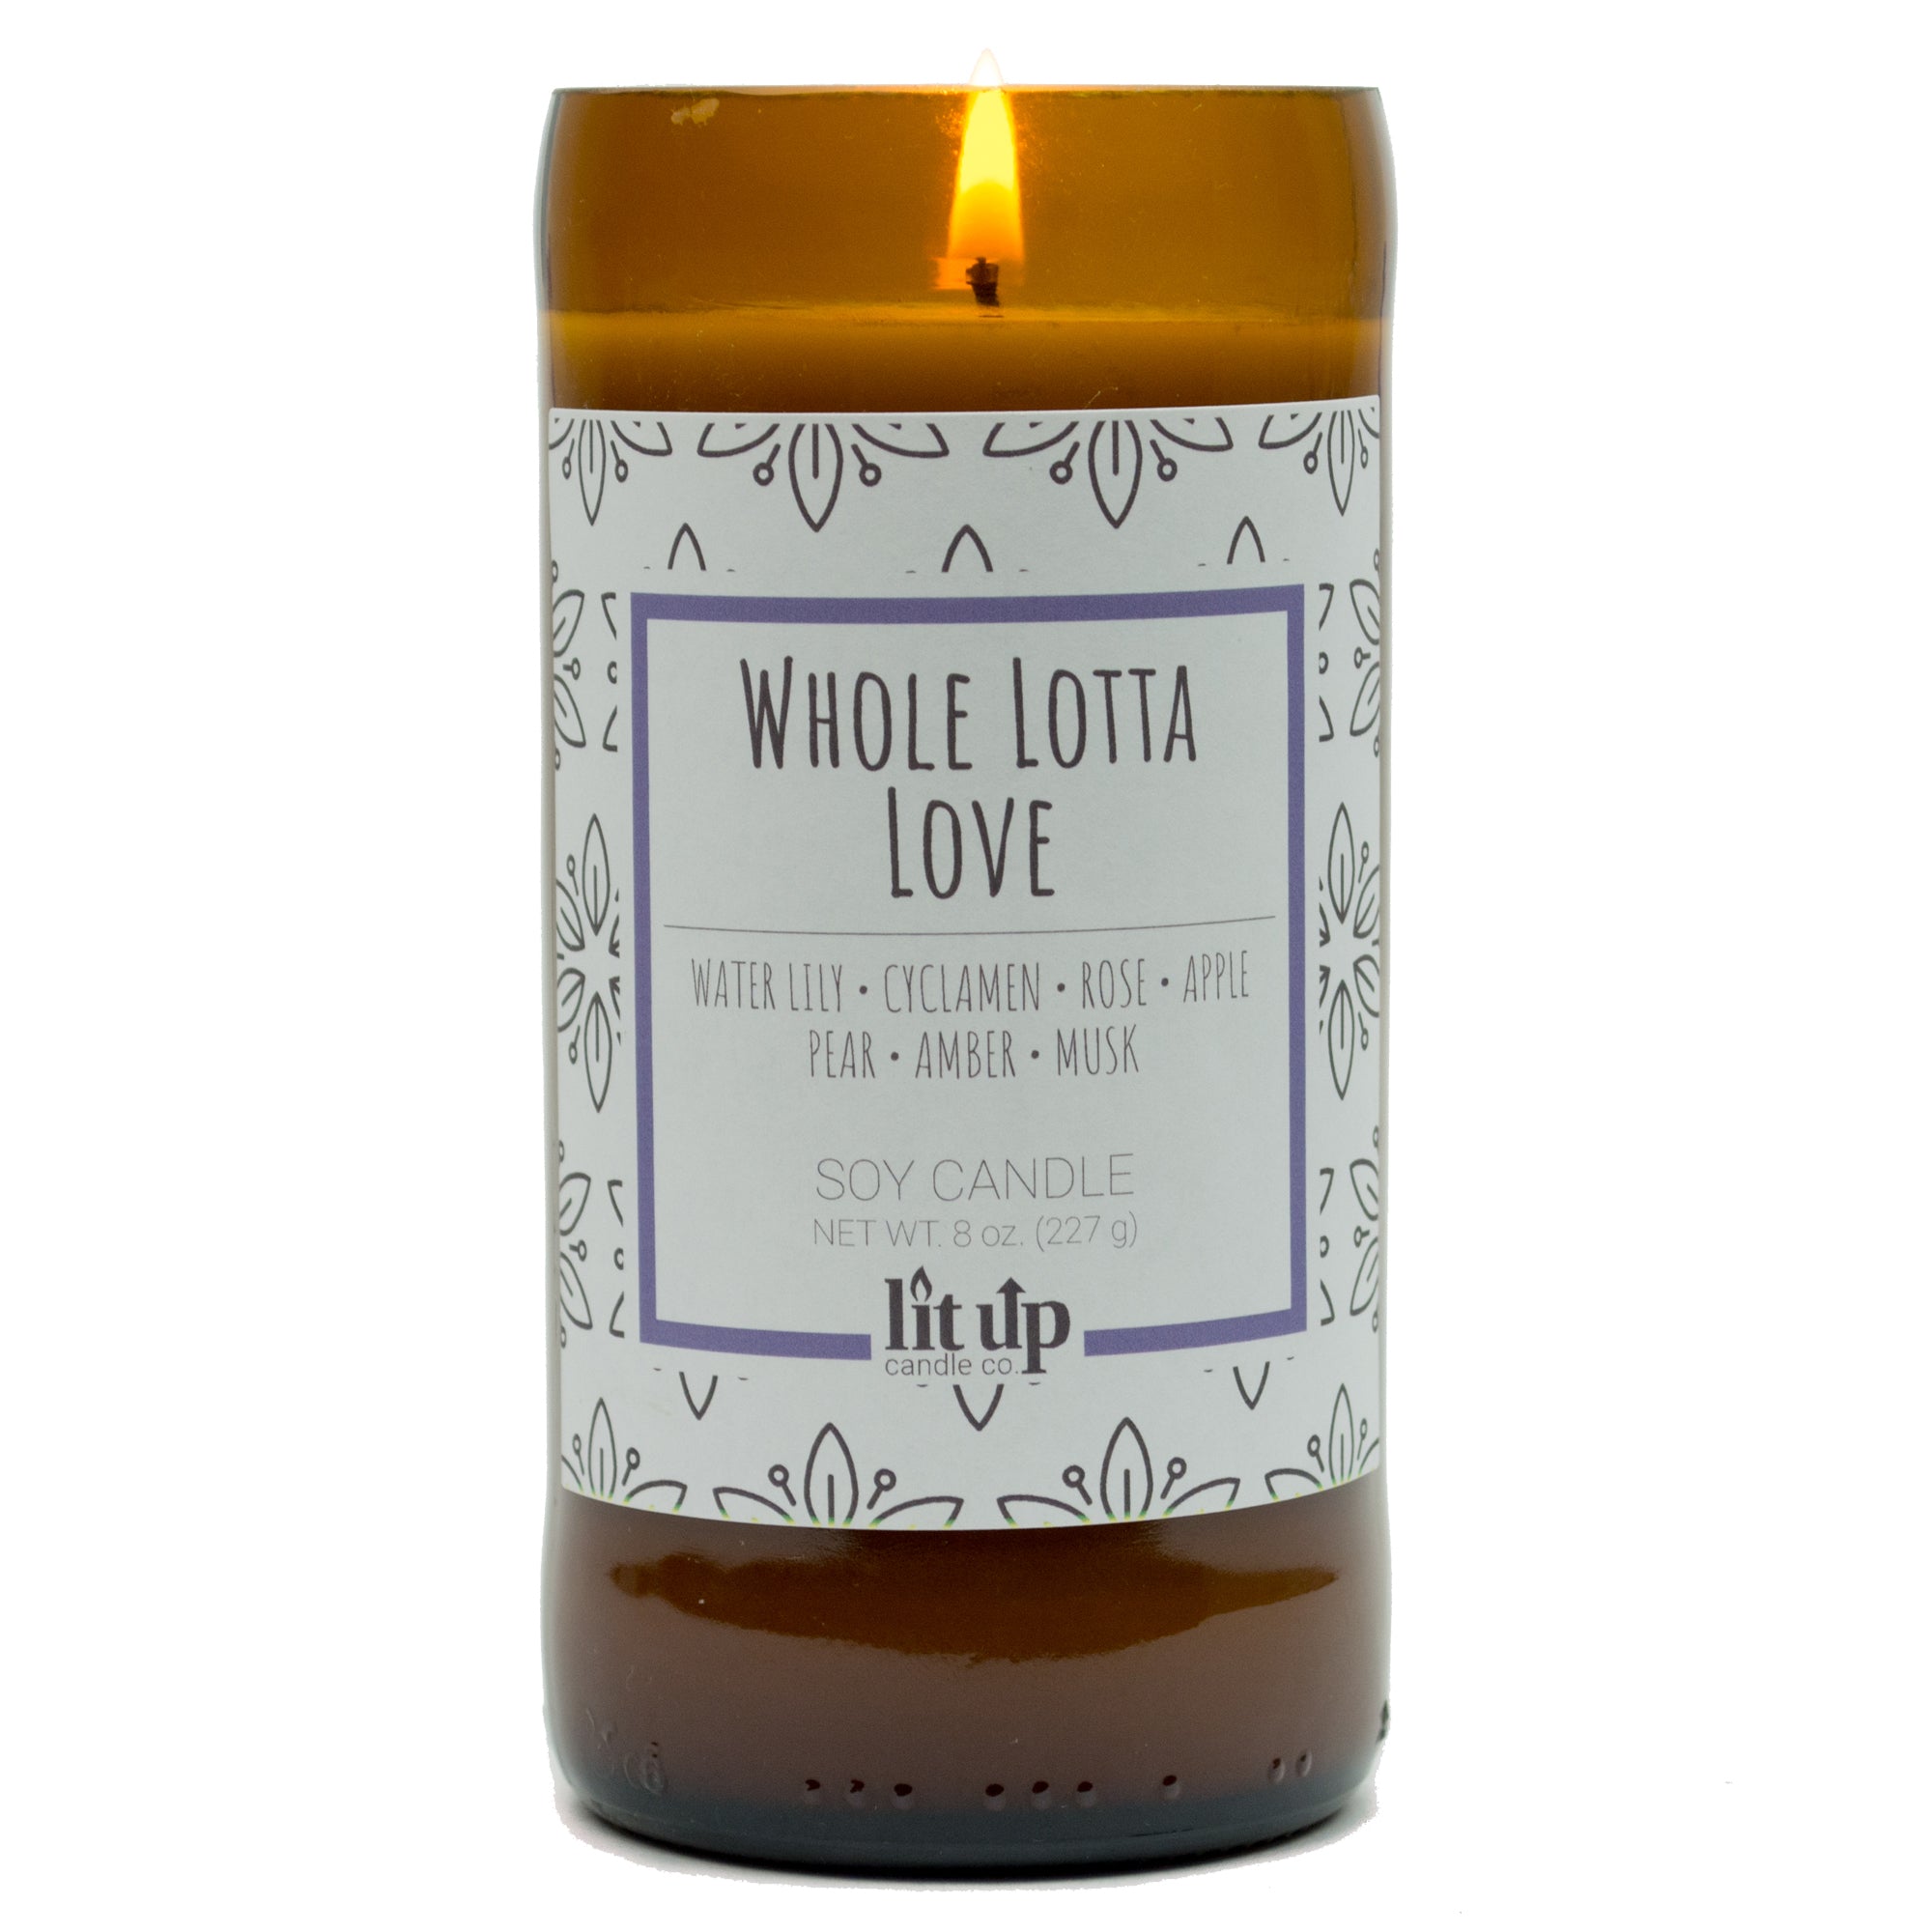 Whole Lotta Love scented 8 oz. soy candle in upcycled beer bottle